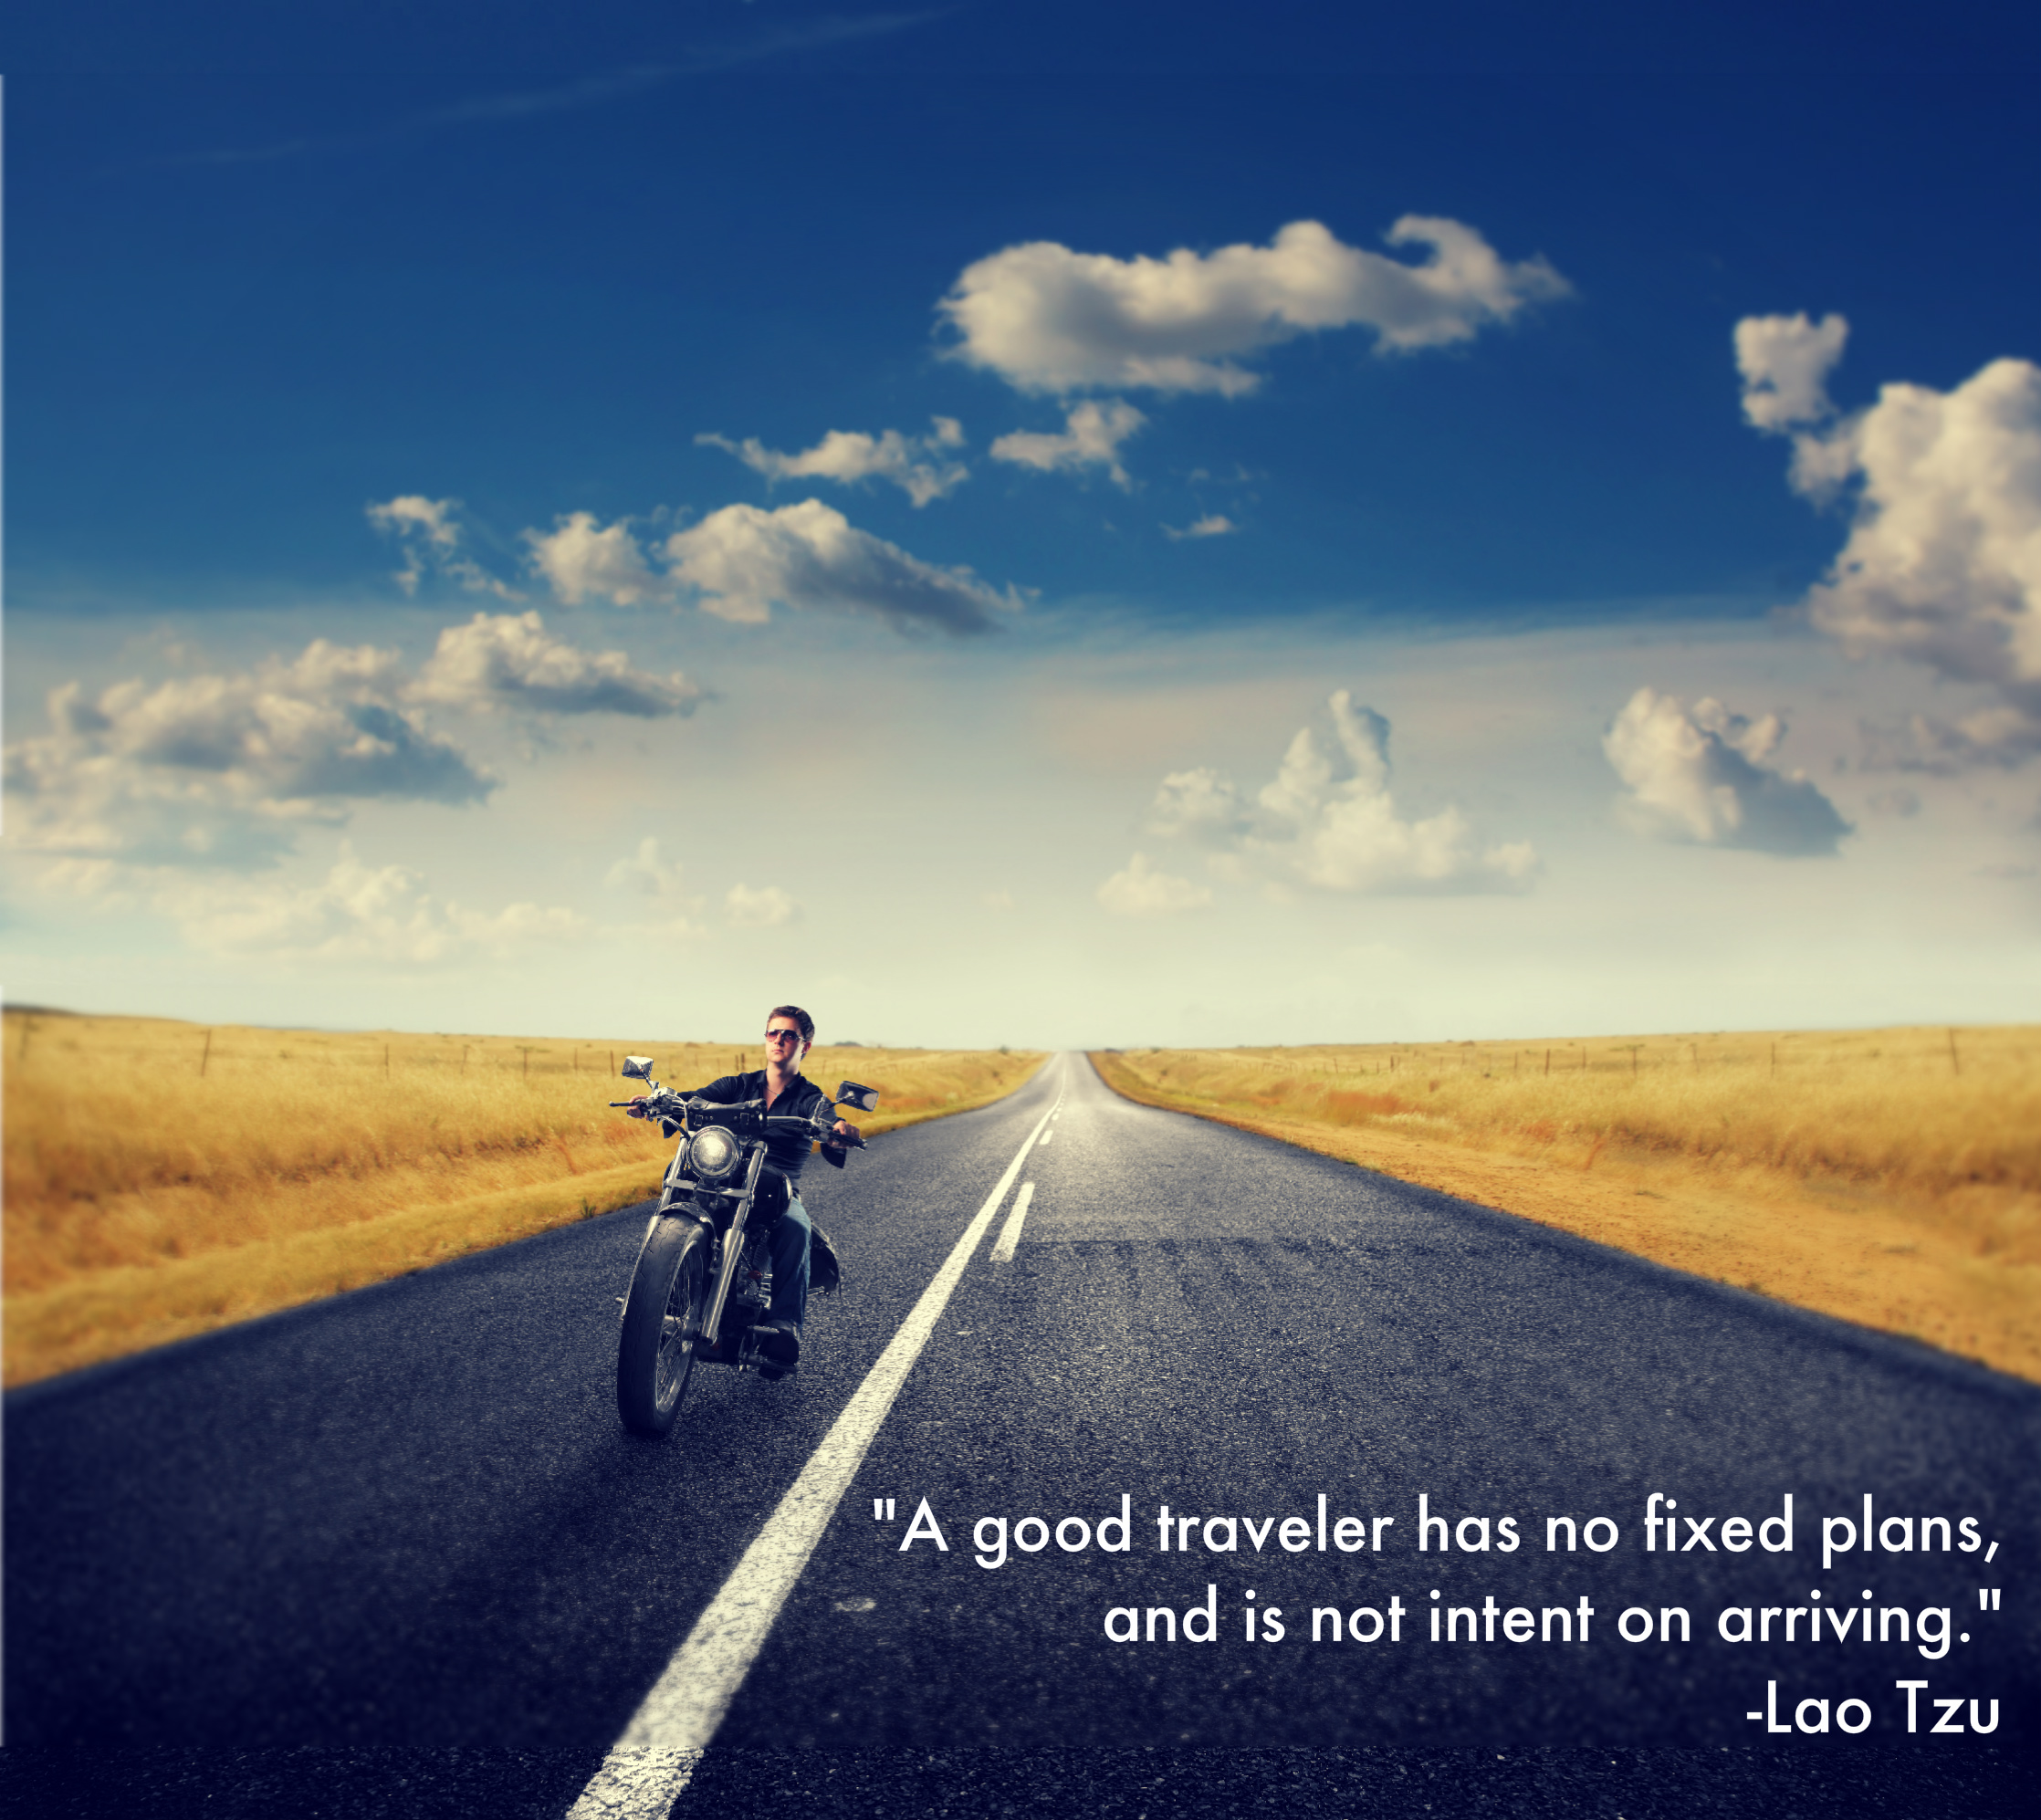 Motorcycle Riding Inspirational Quotes. QuotesGram